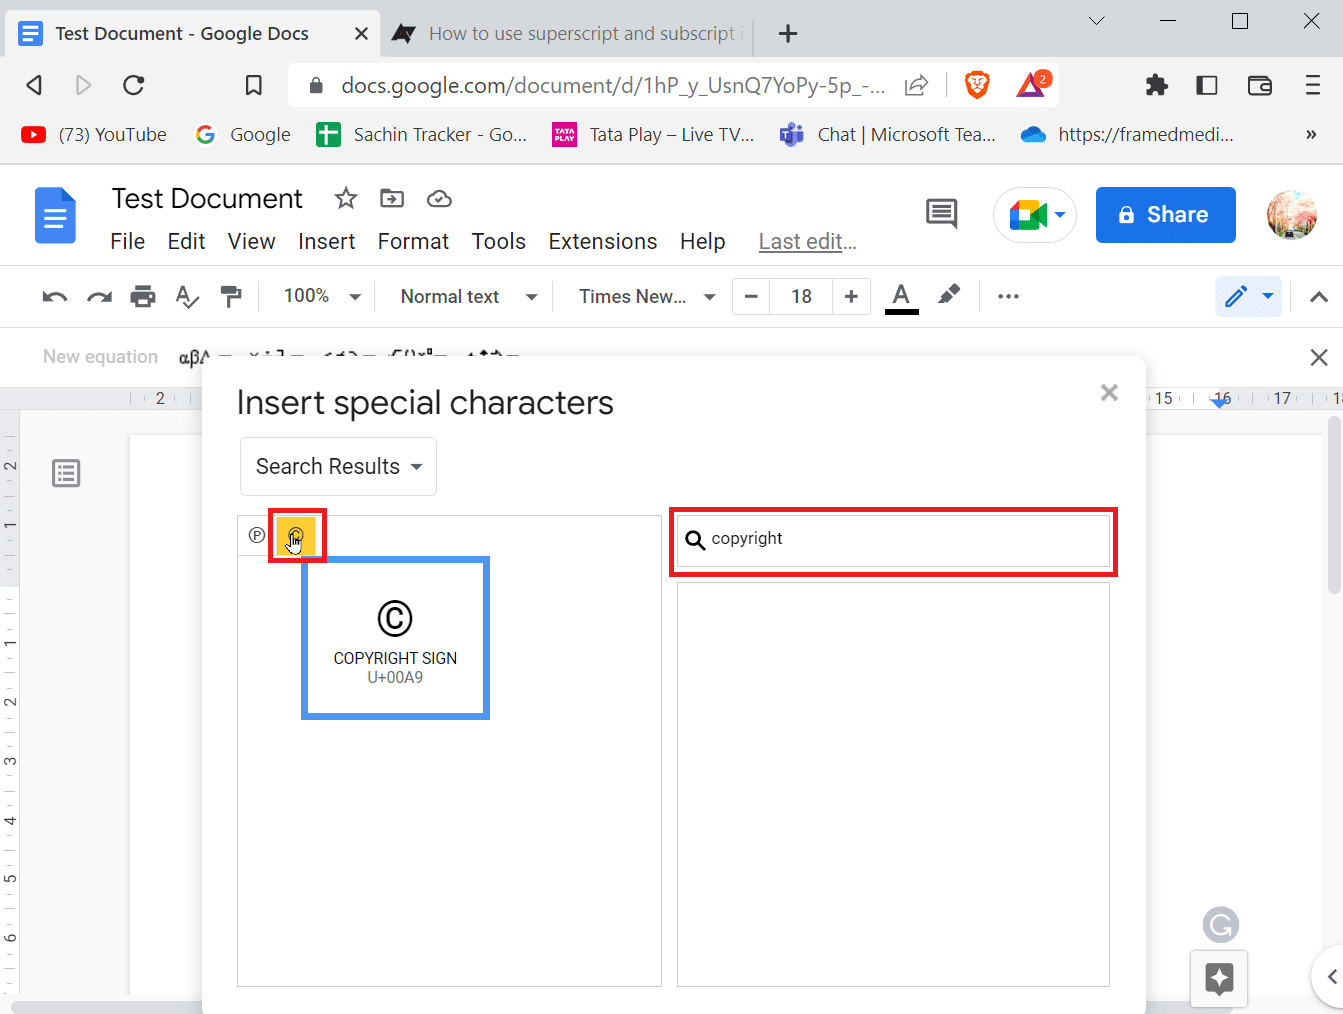 search any symbol and click on the symbol to enter it